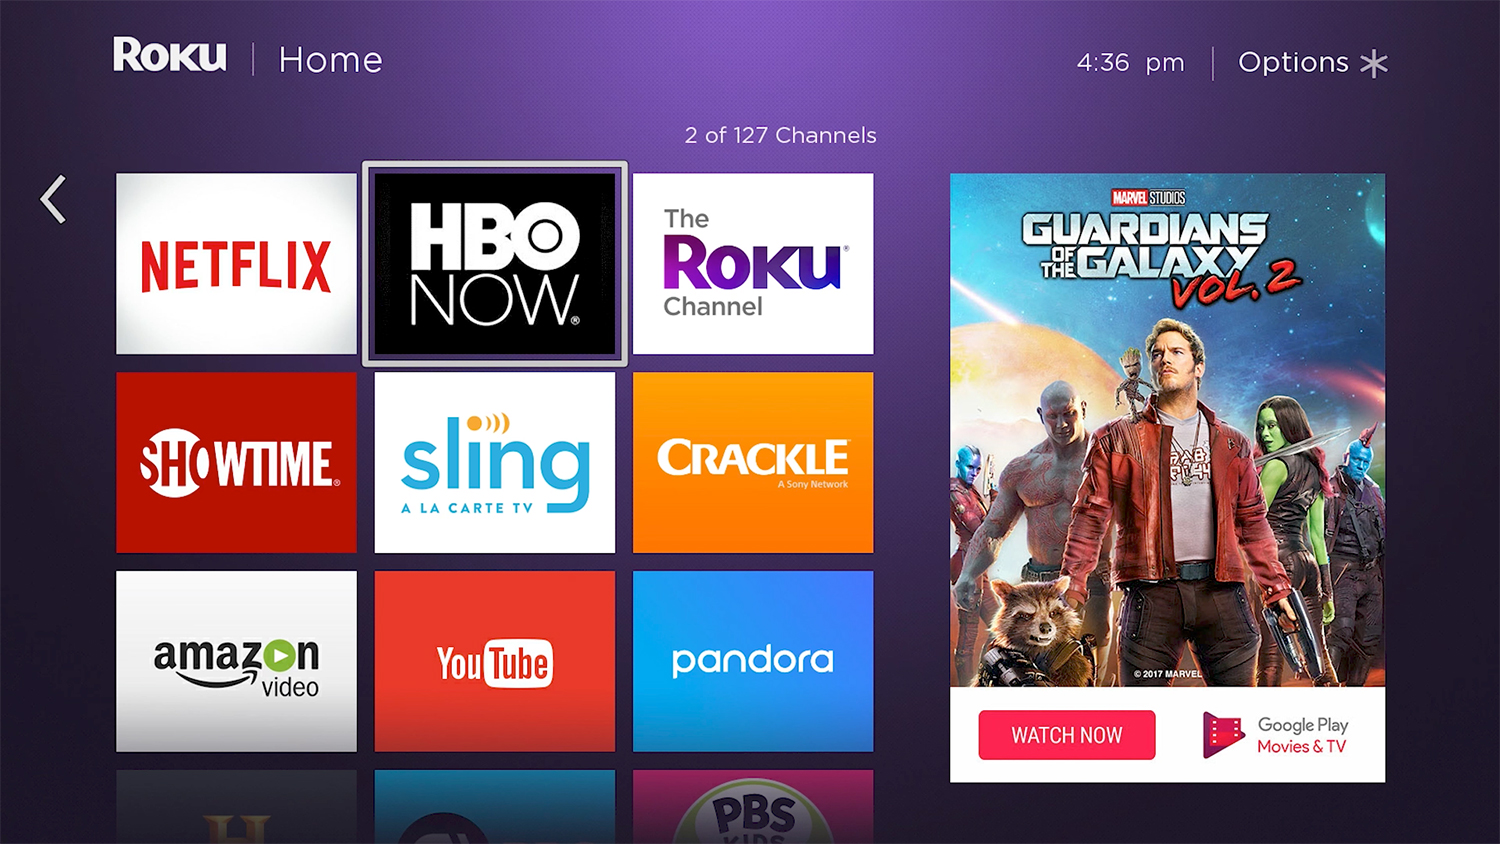 Prime Video on Roku: How to get it and start watching now